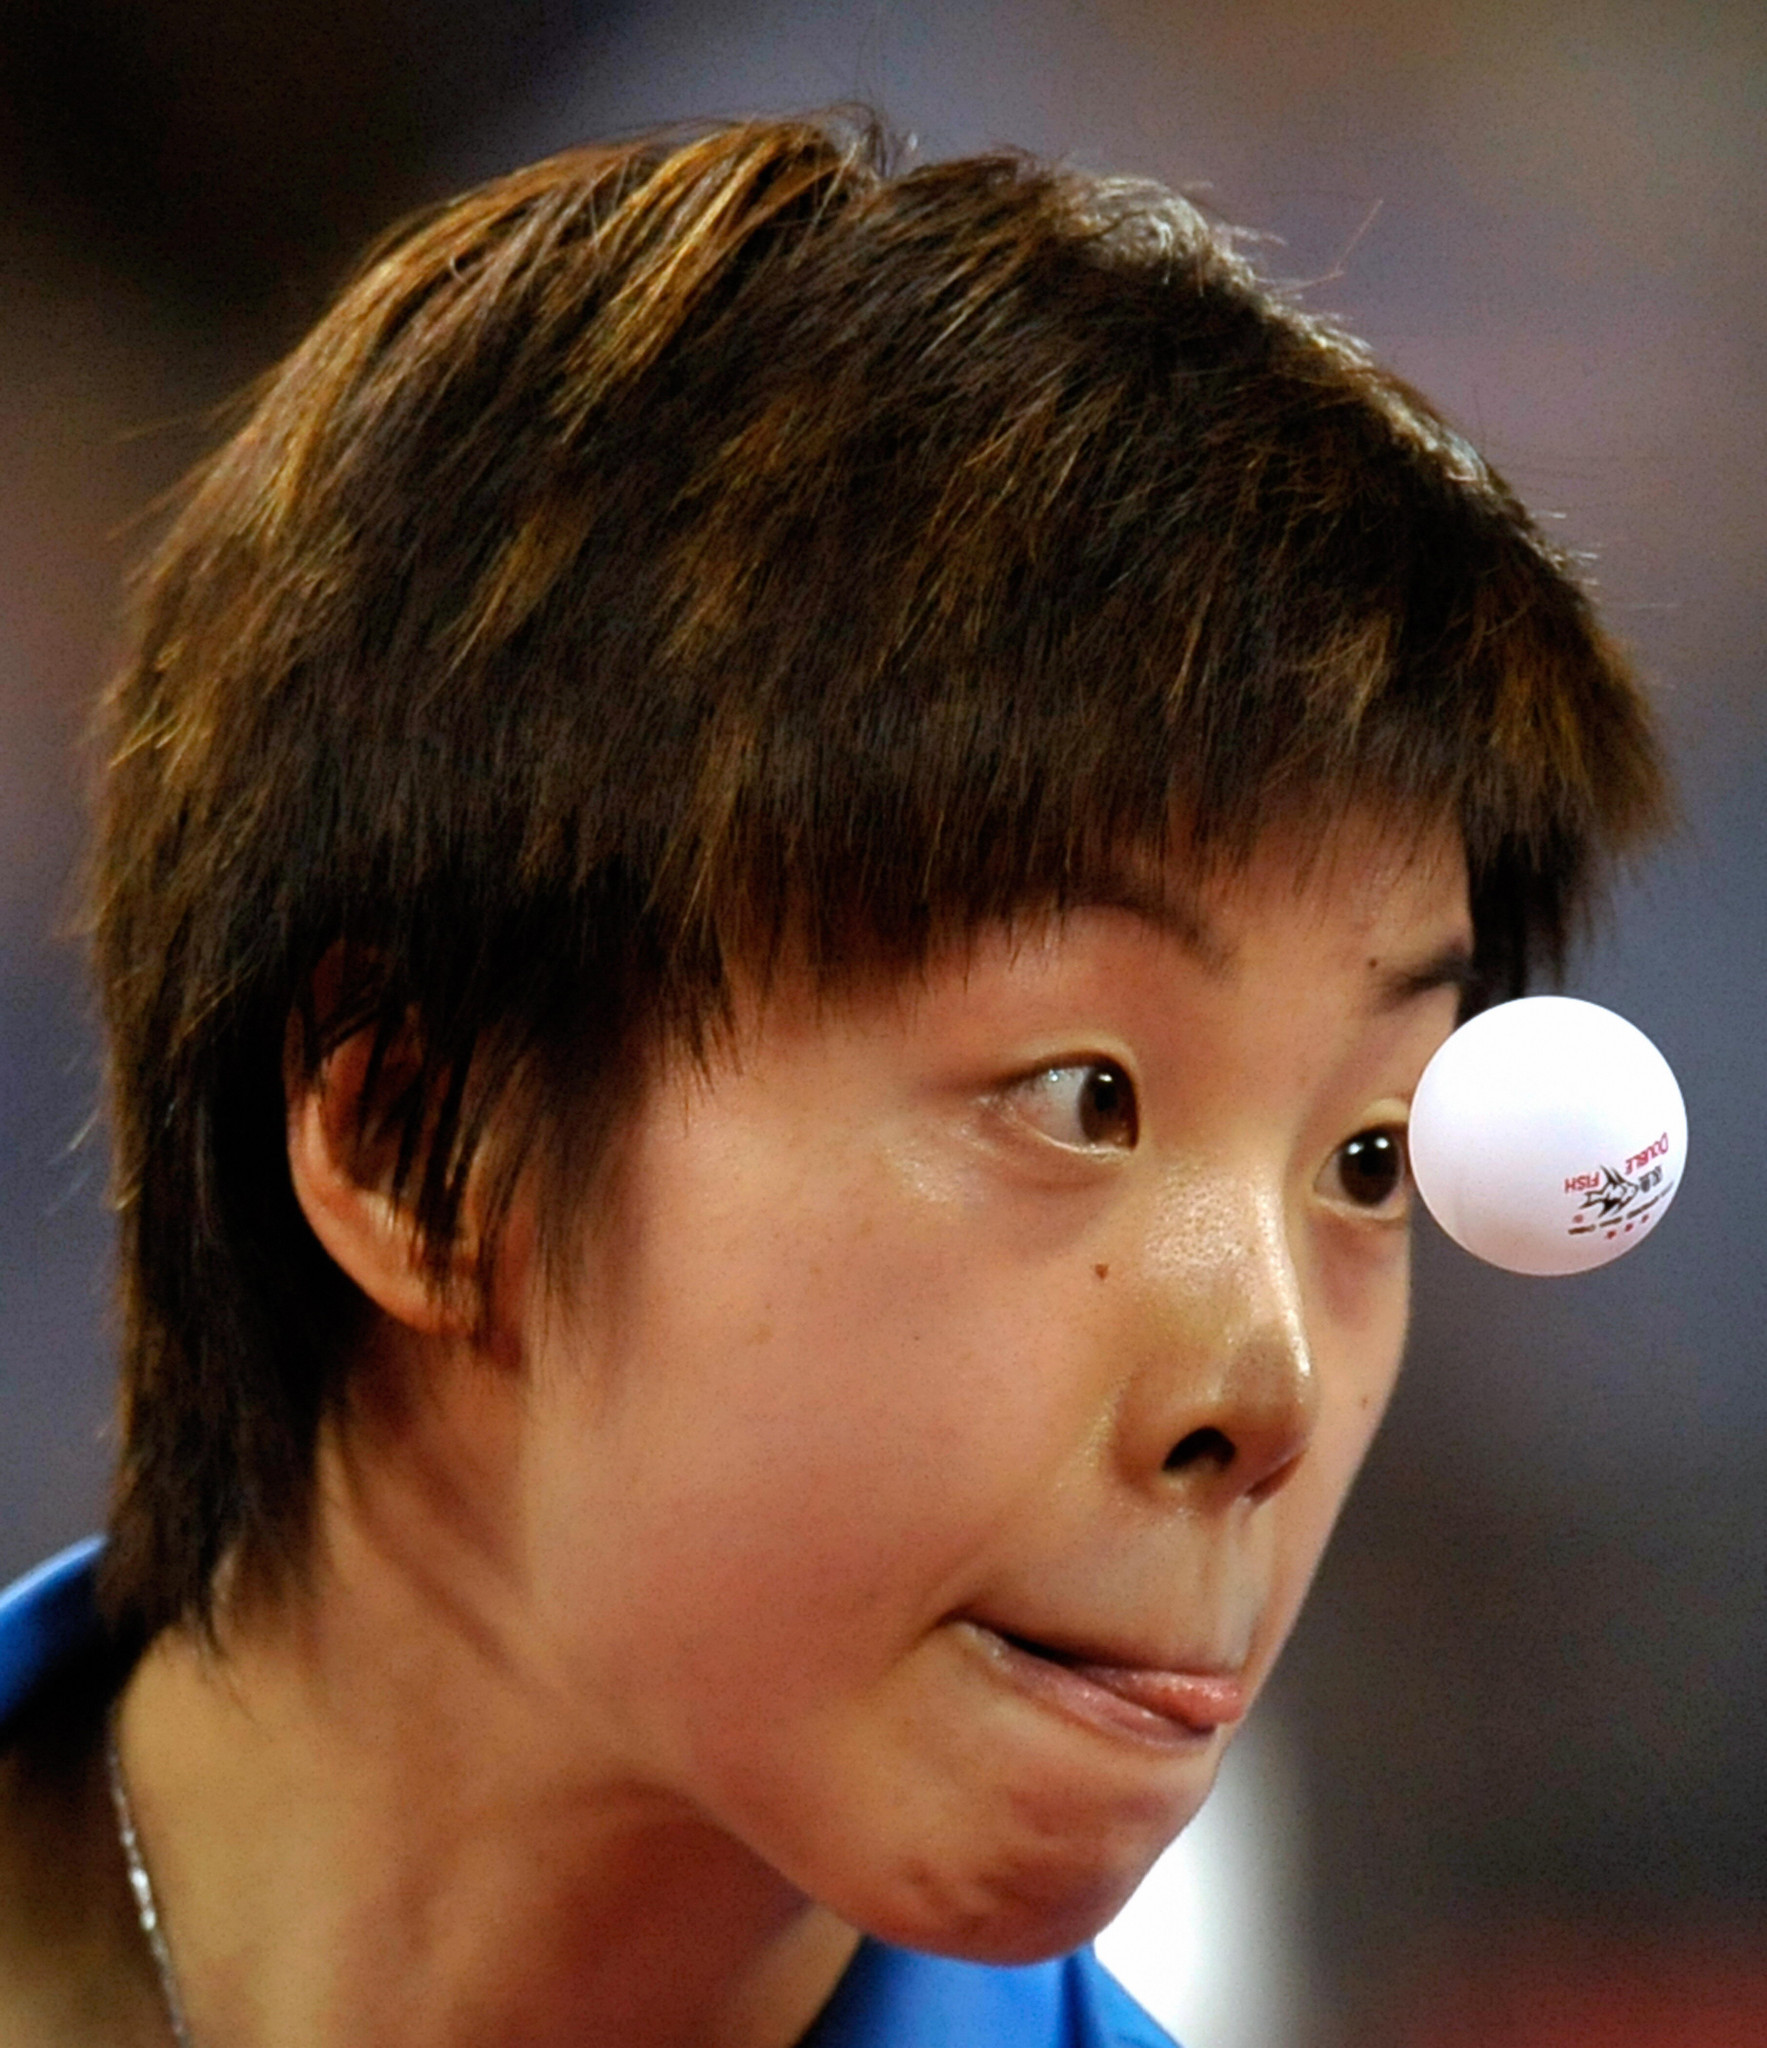 Chinese company Double Fish last supplied the balls for the Olympic and Paralympic Games table tennis tournament during Beijing 2008 ©Getty Images 